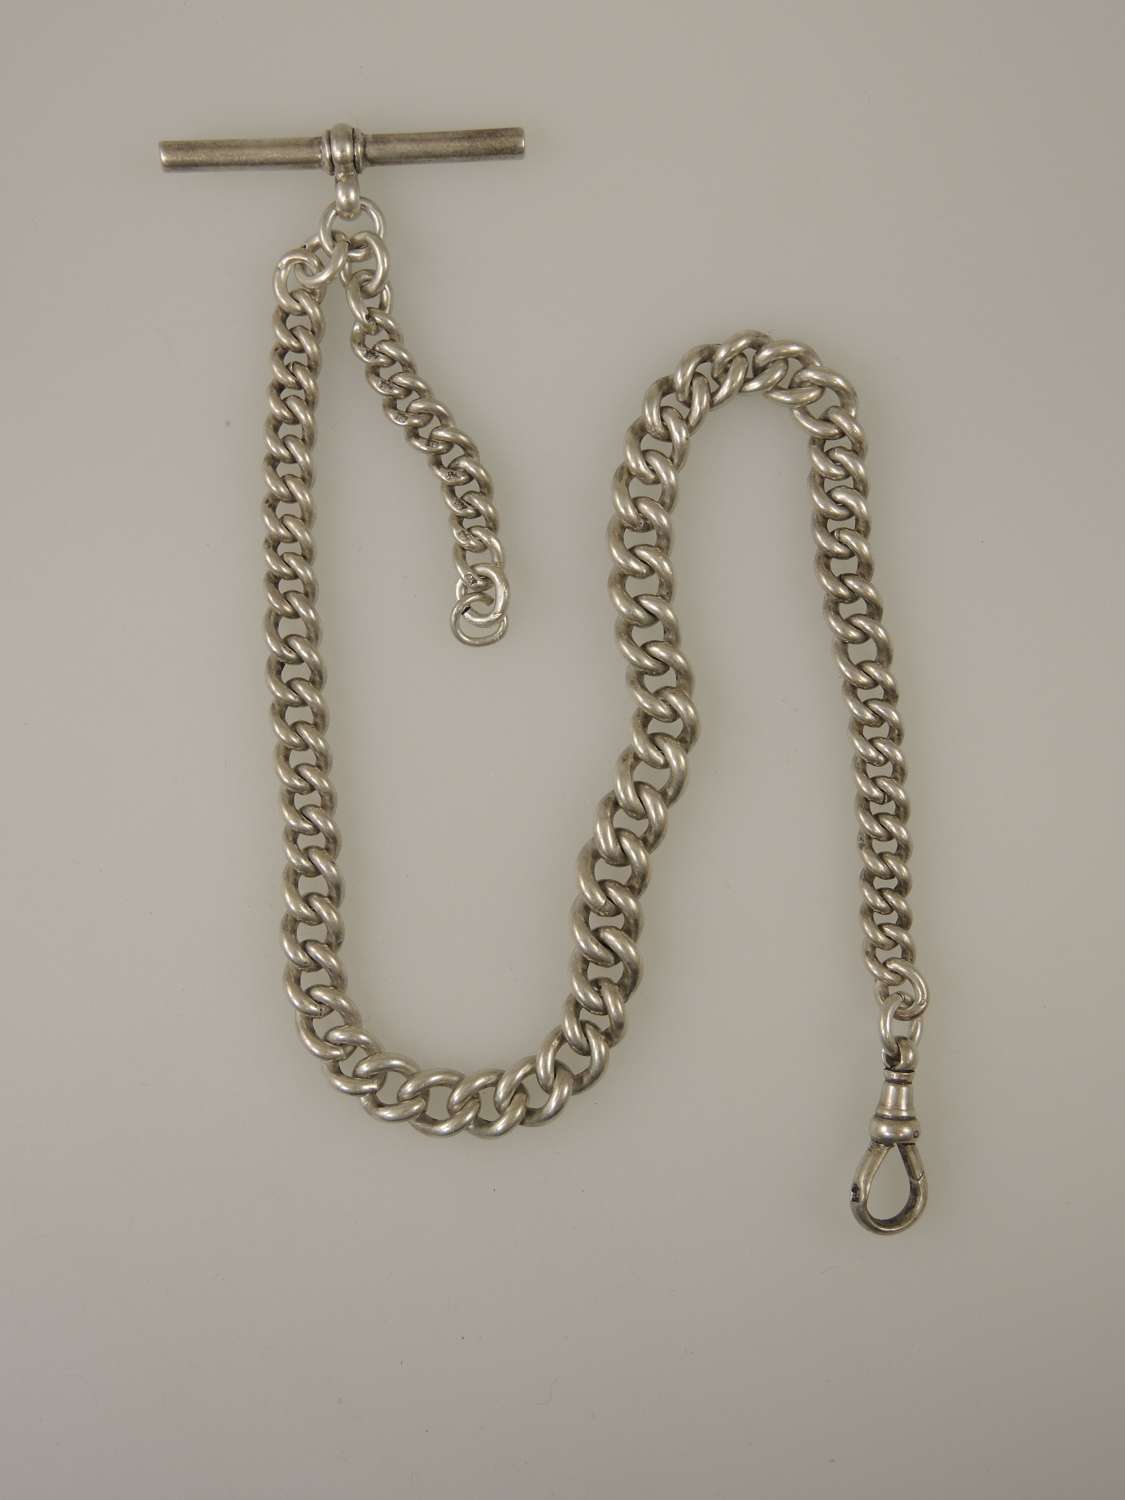 English silver watch chain. Chester 1887